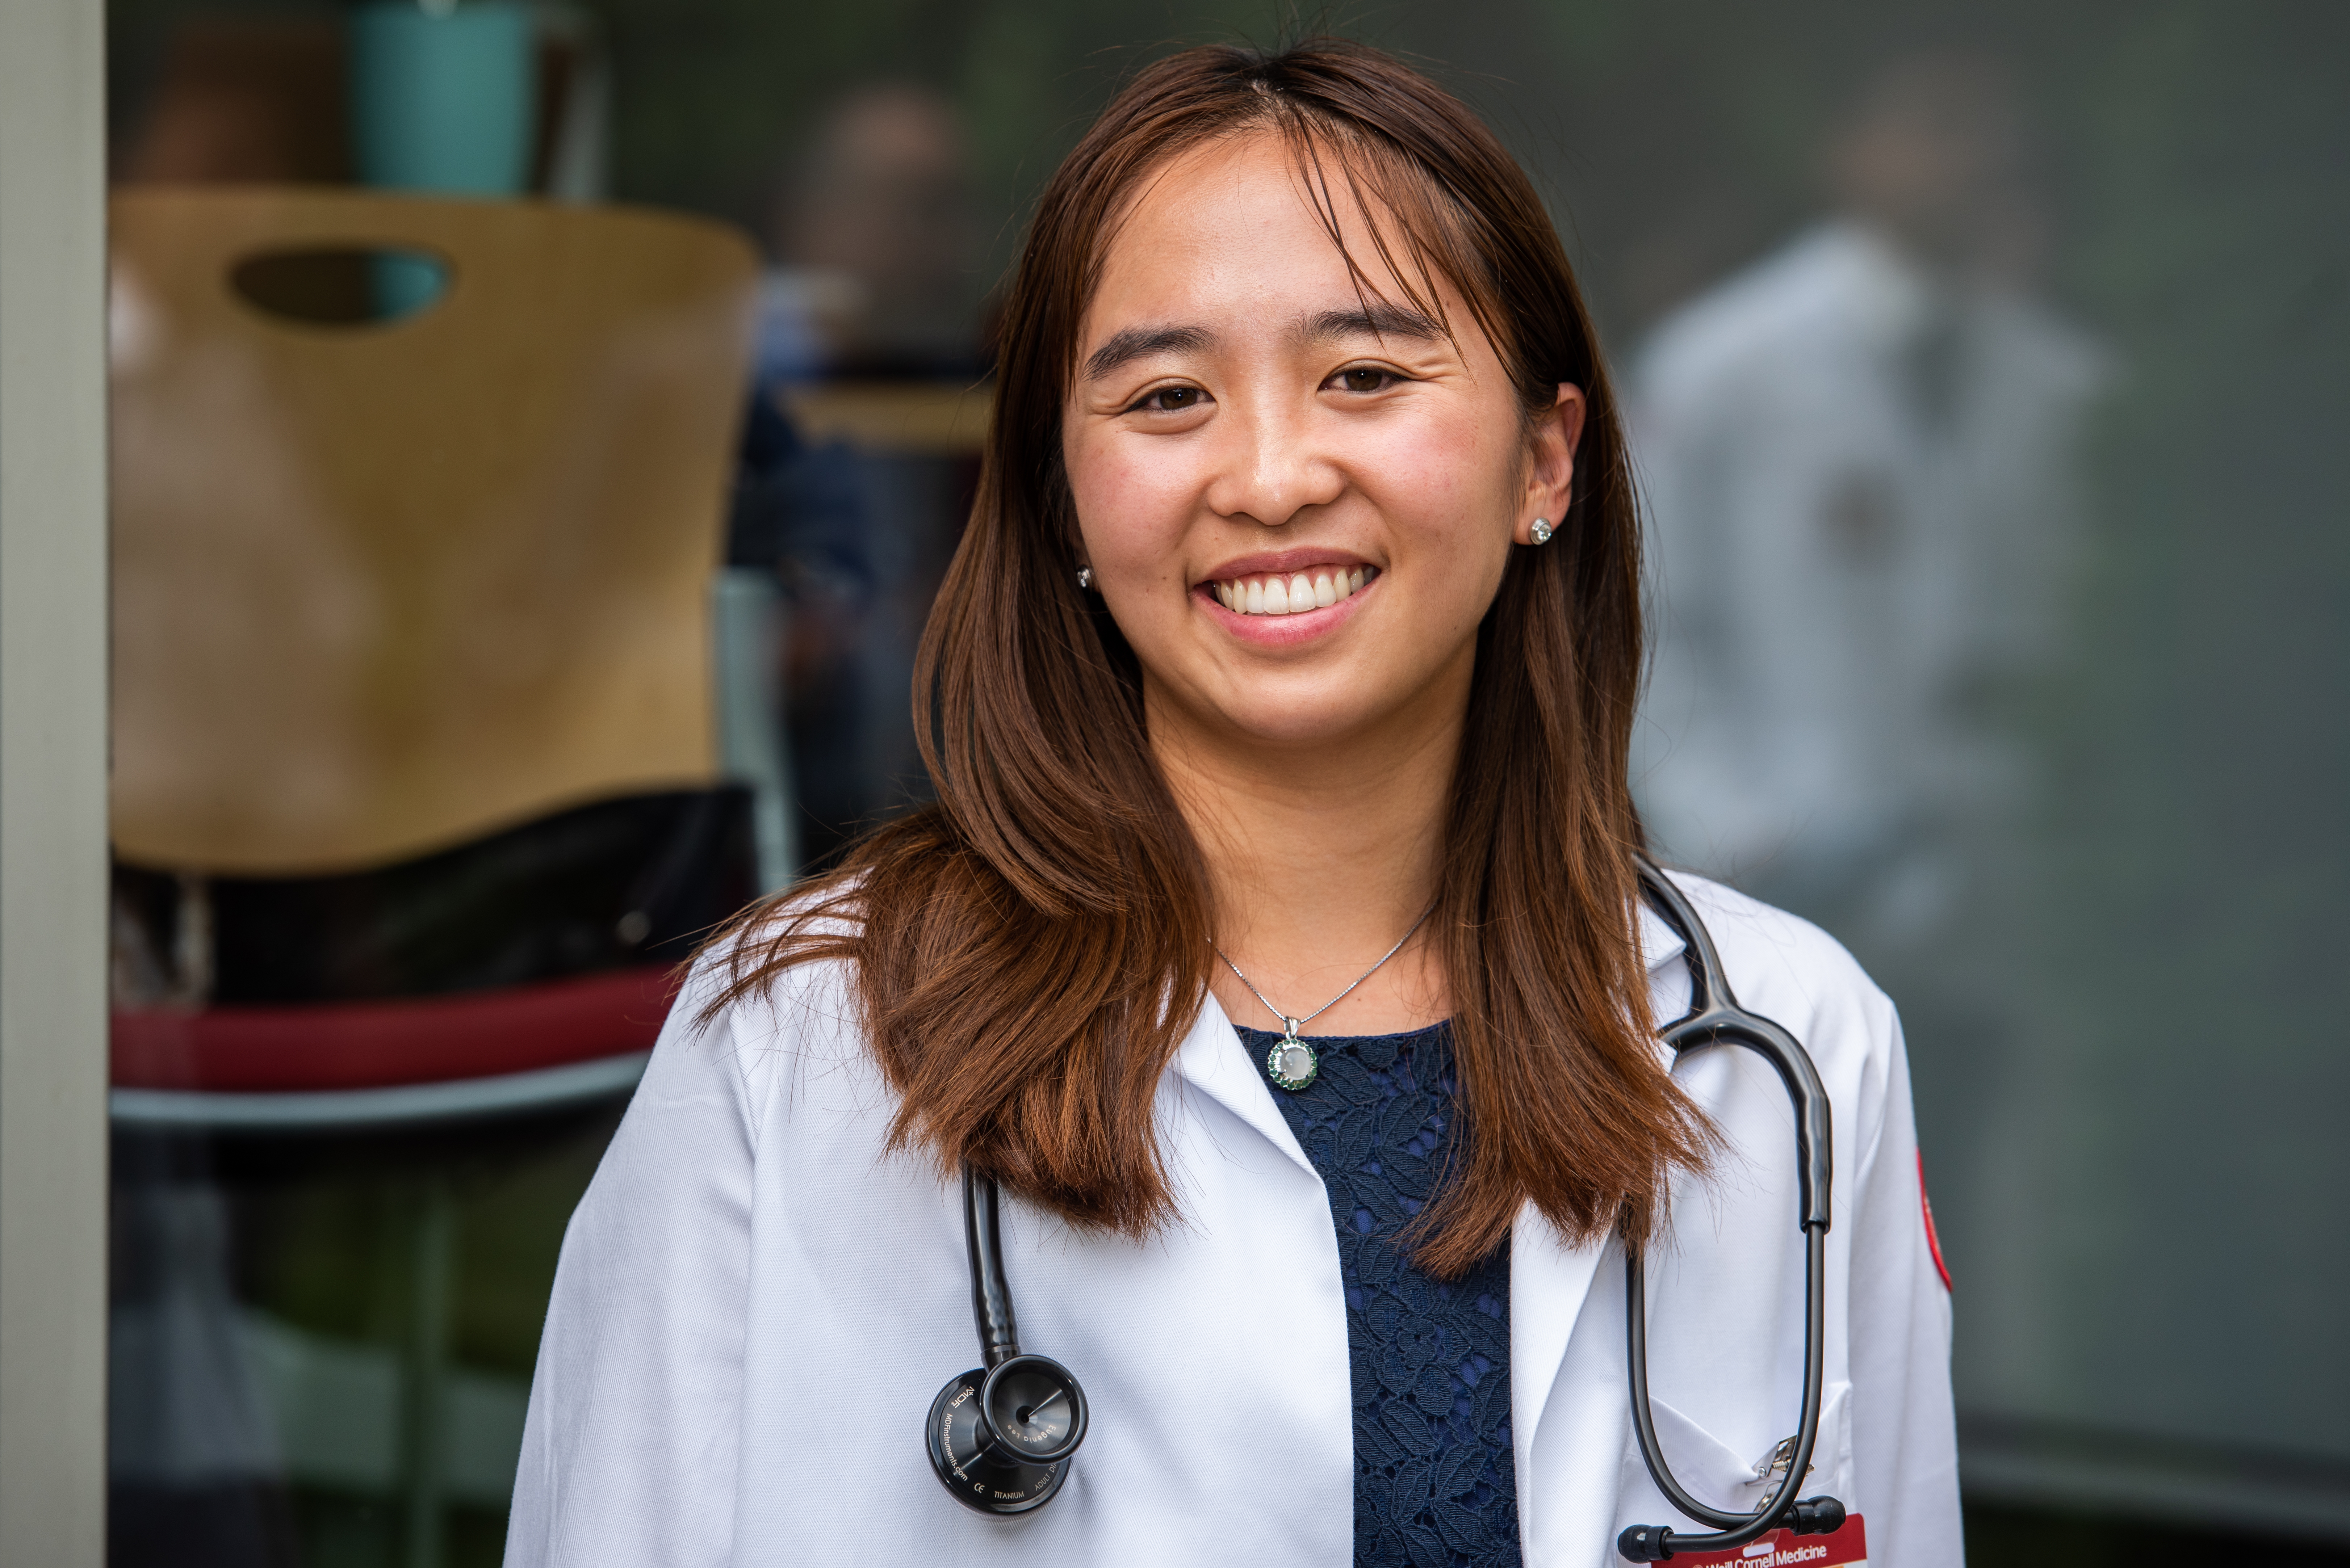 A female first-year medical student poses for a photo wearing her short white coat